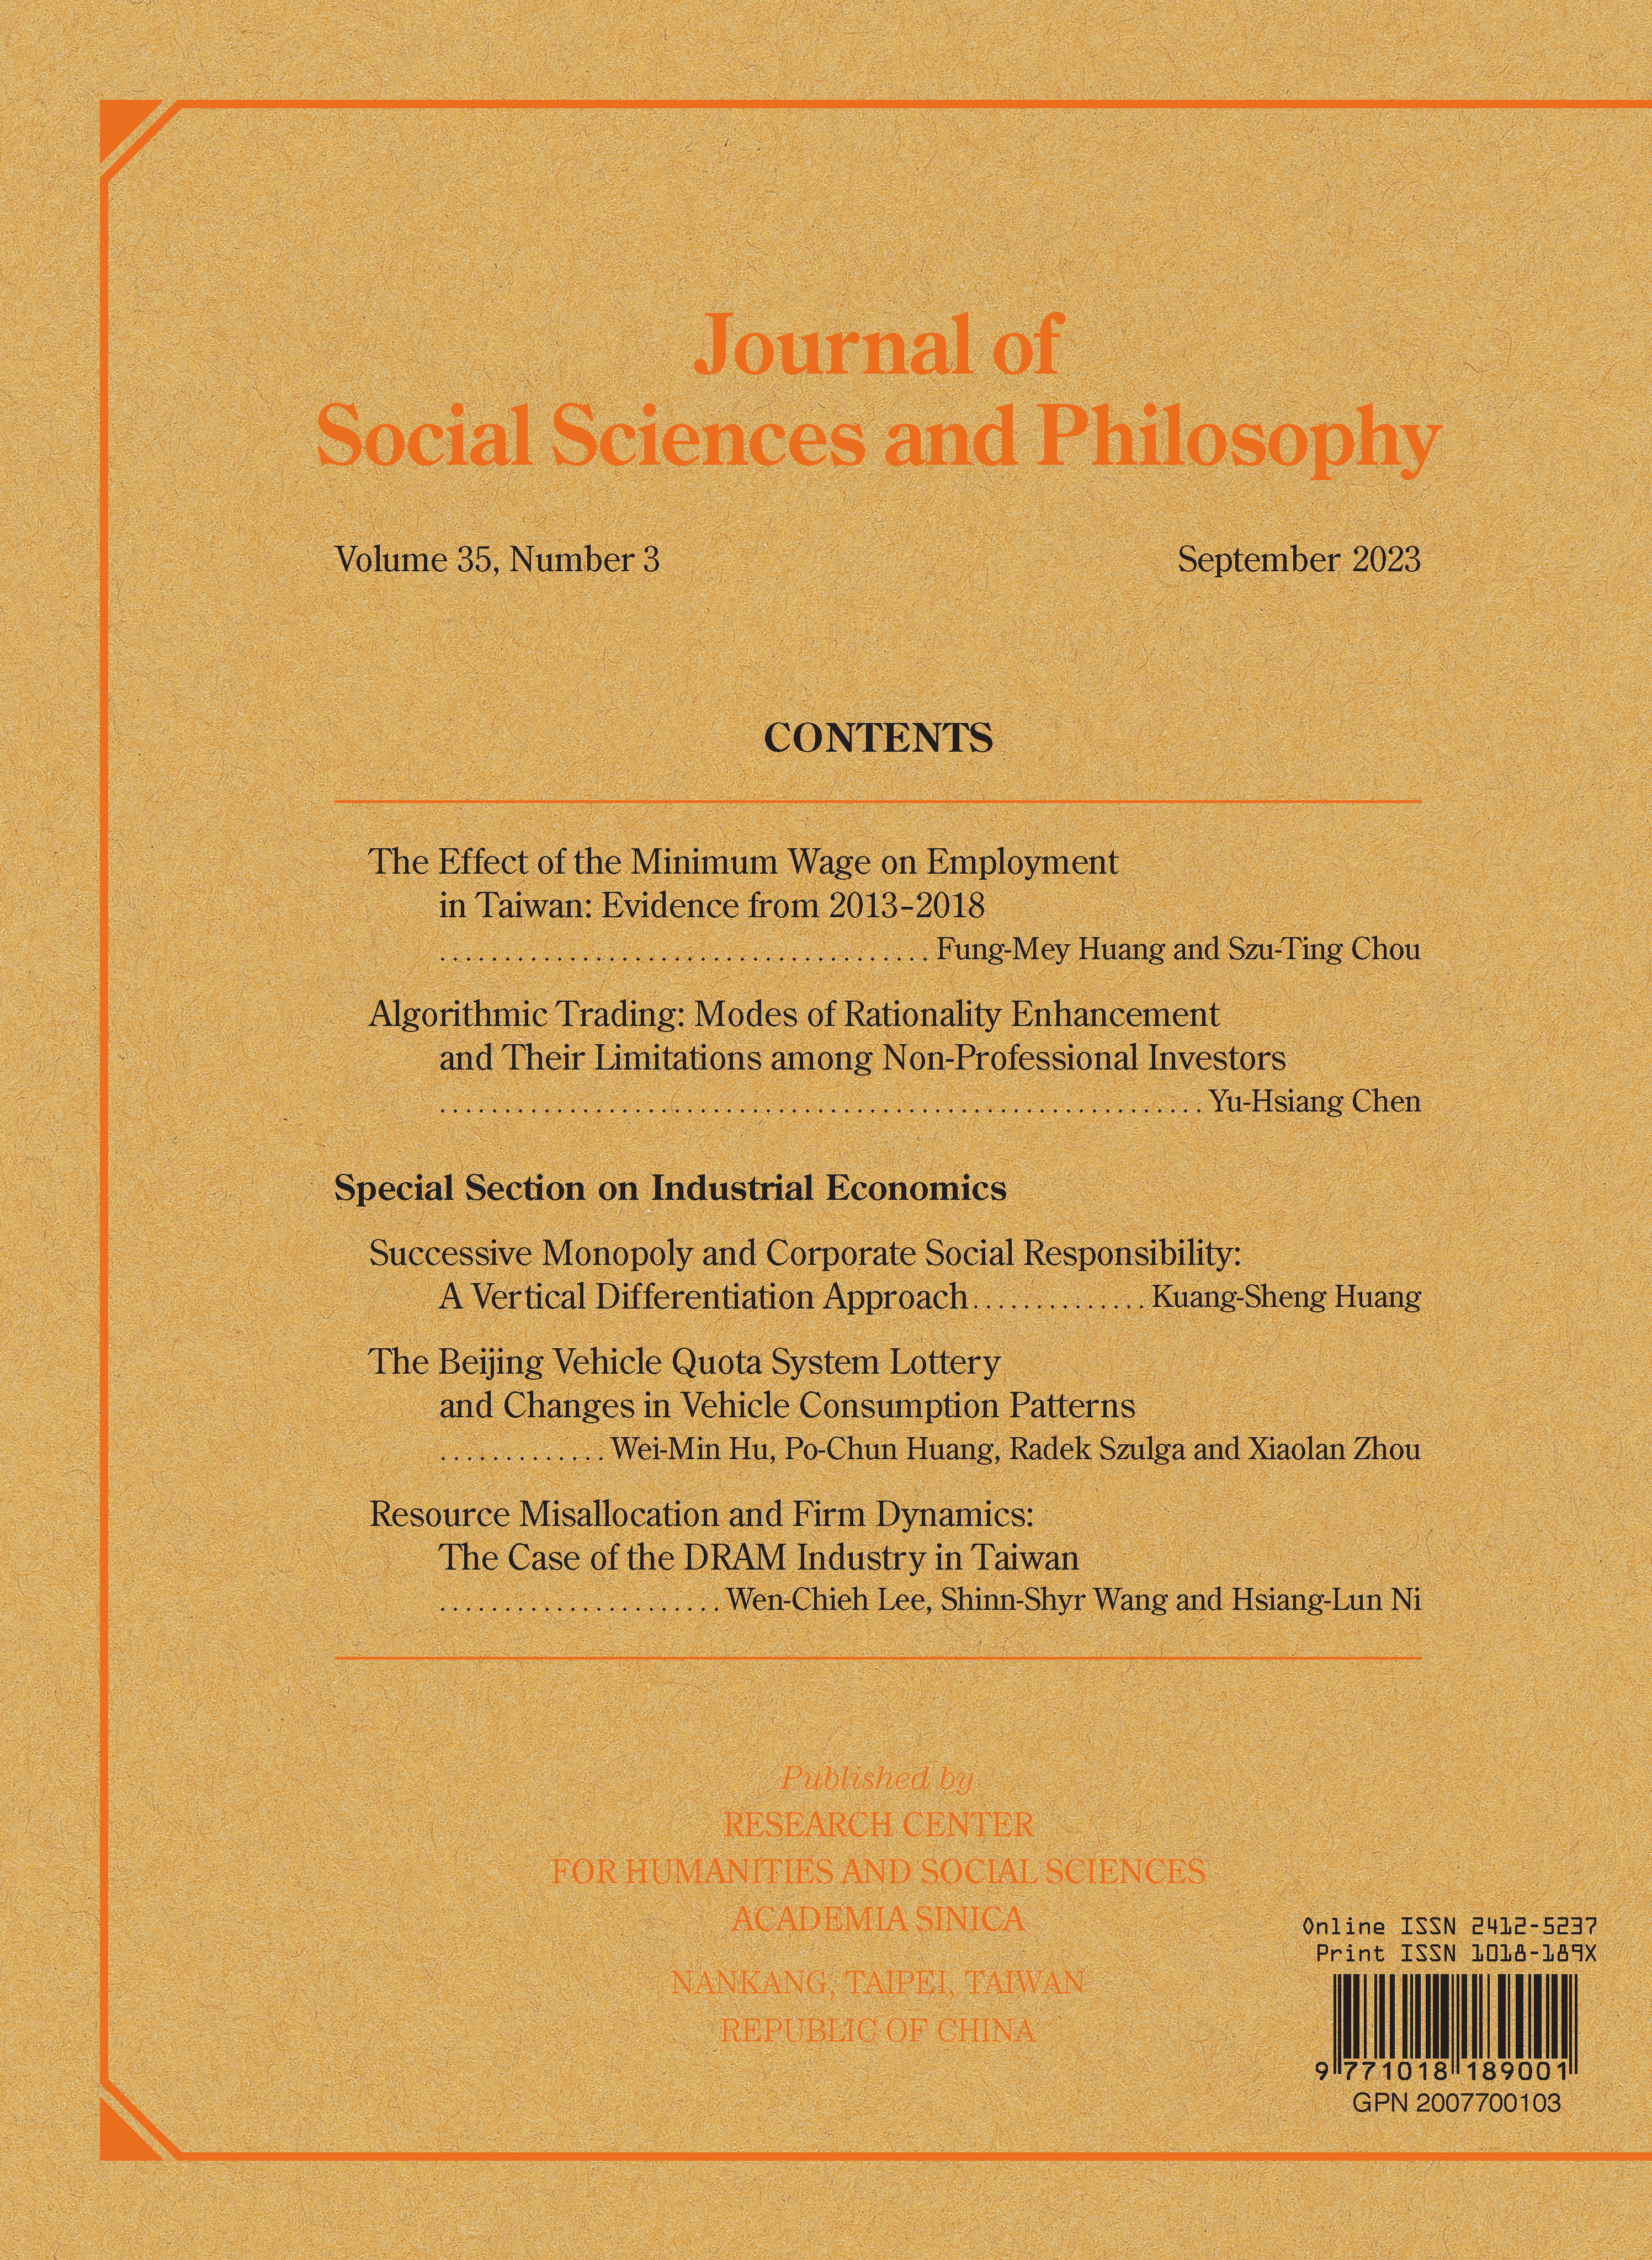 Journal of Social Sciences and Philosophy (Vol. 35, No. 3)